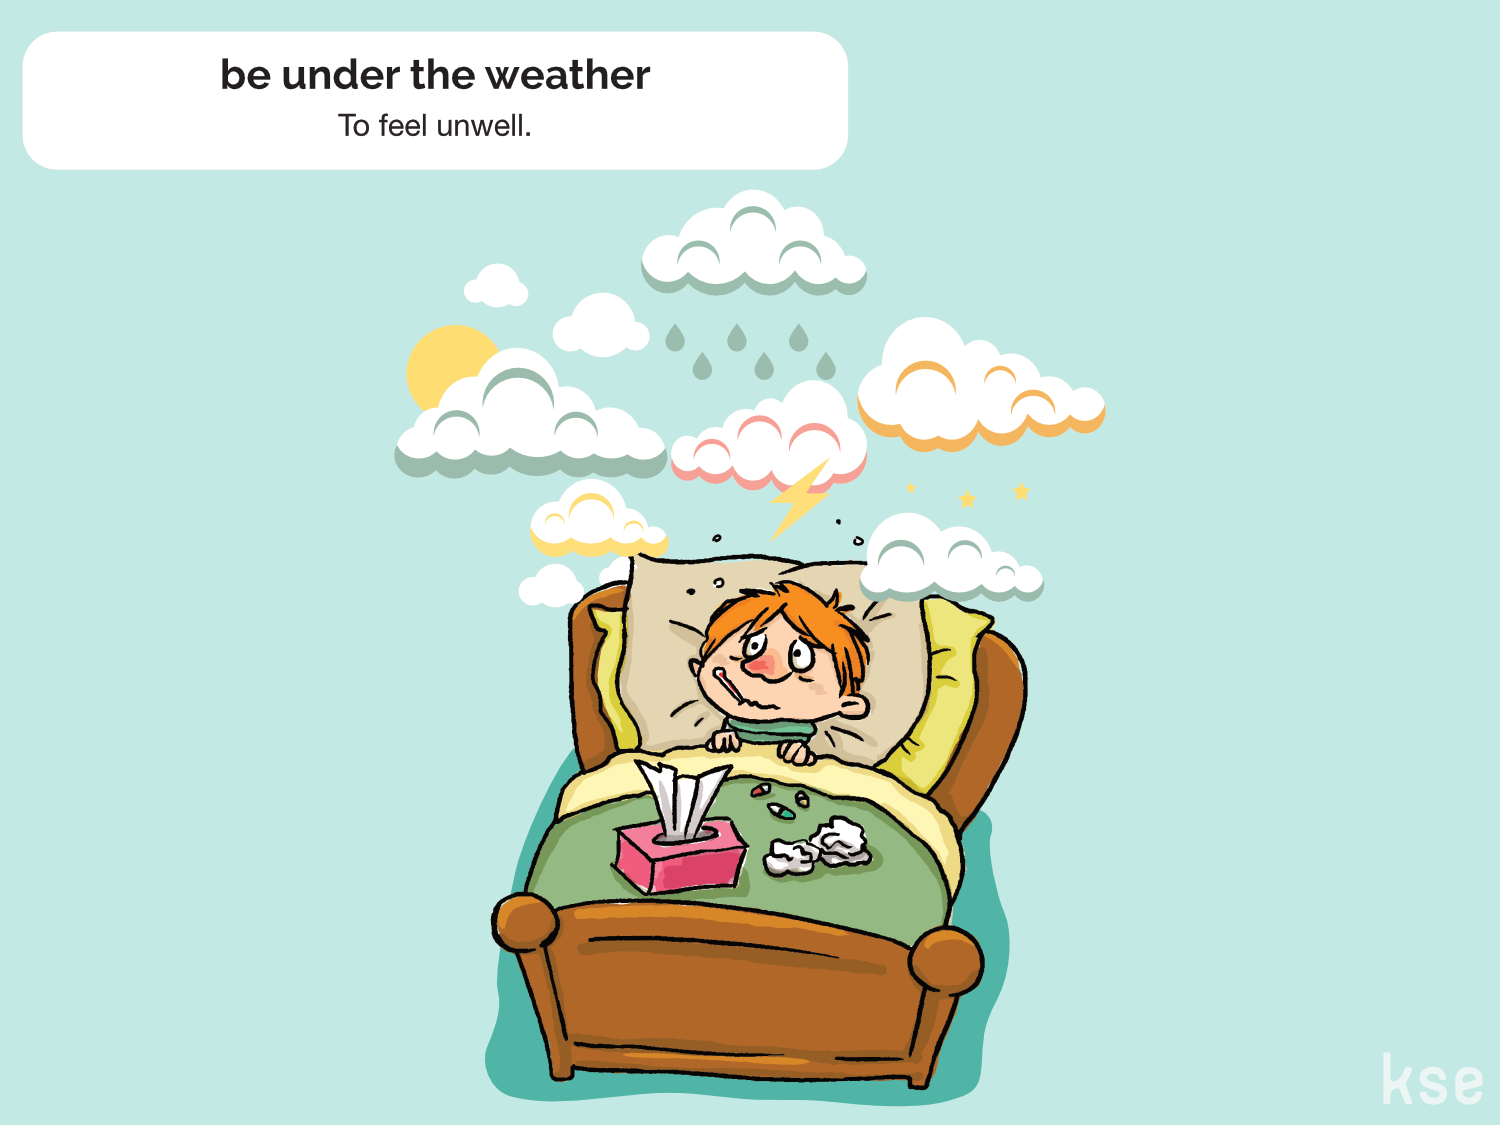 Feeling idioms. Under the weather. To be under the weather идиома. Under the weather идиомы. To feel under the weather идиома.